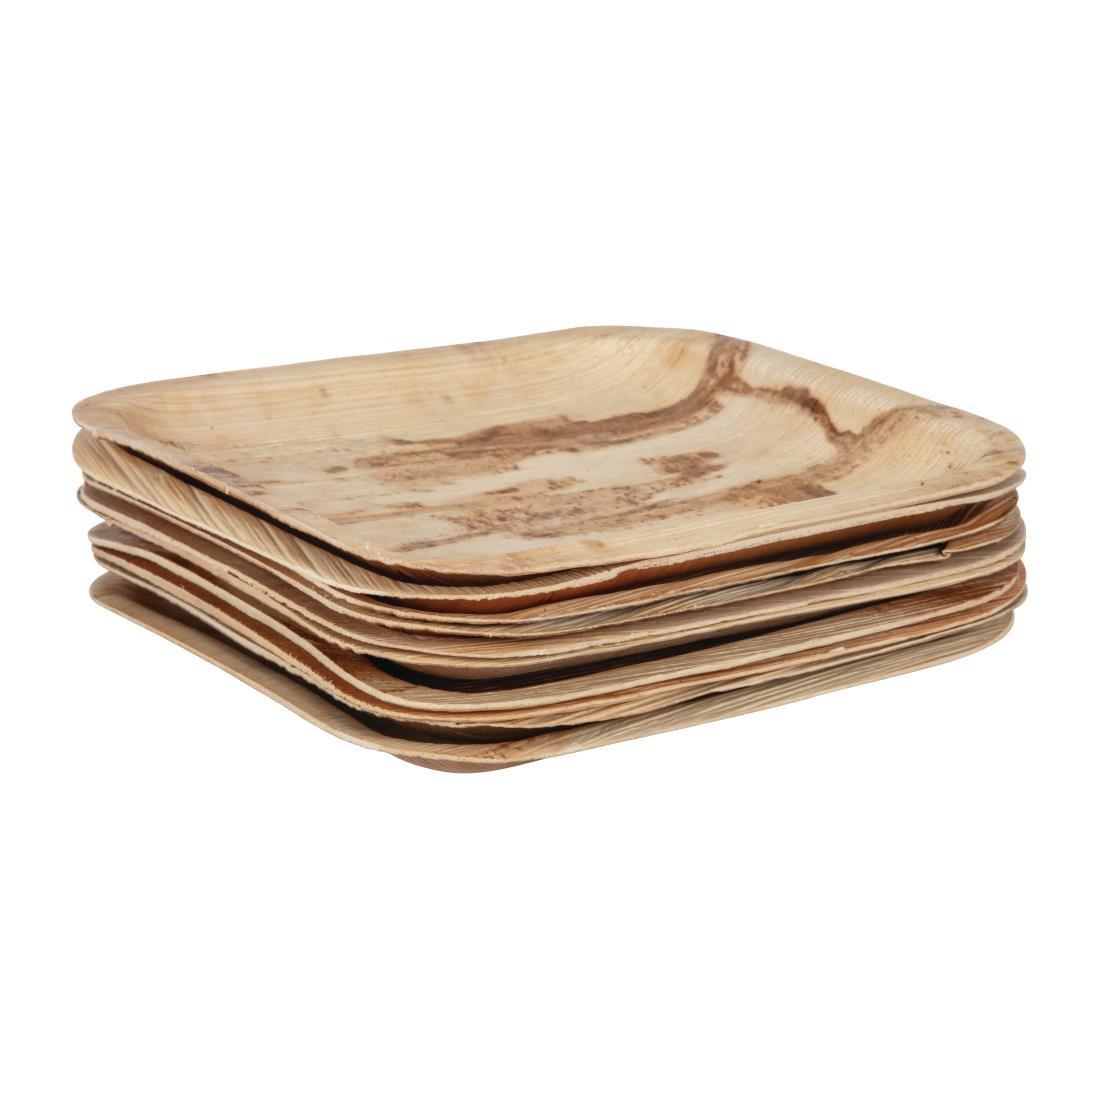 Fiesta Compostable Palm Leaf Plates Square 200mm (Pack of 100) - DK376  - 6